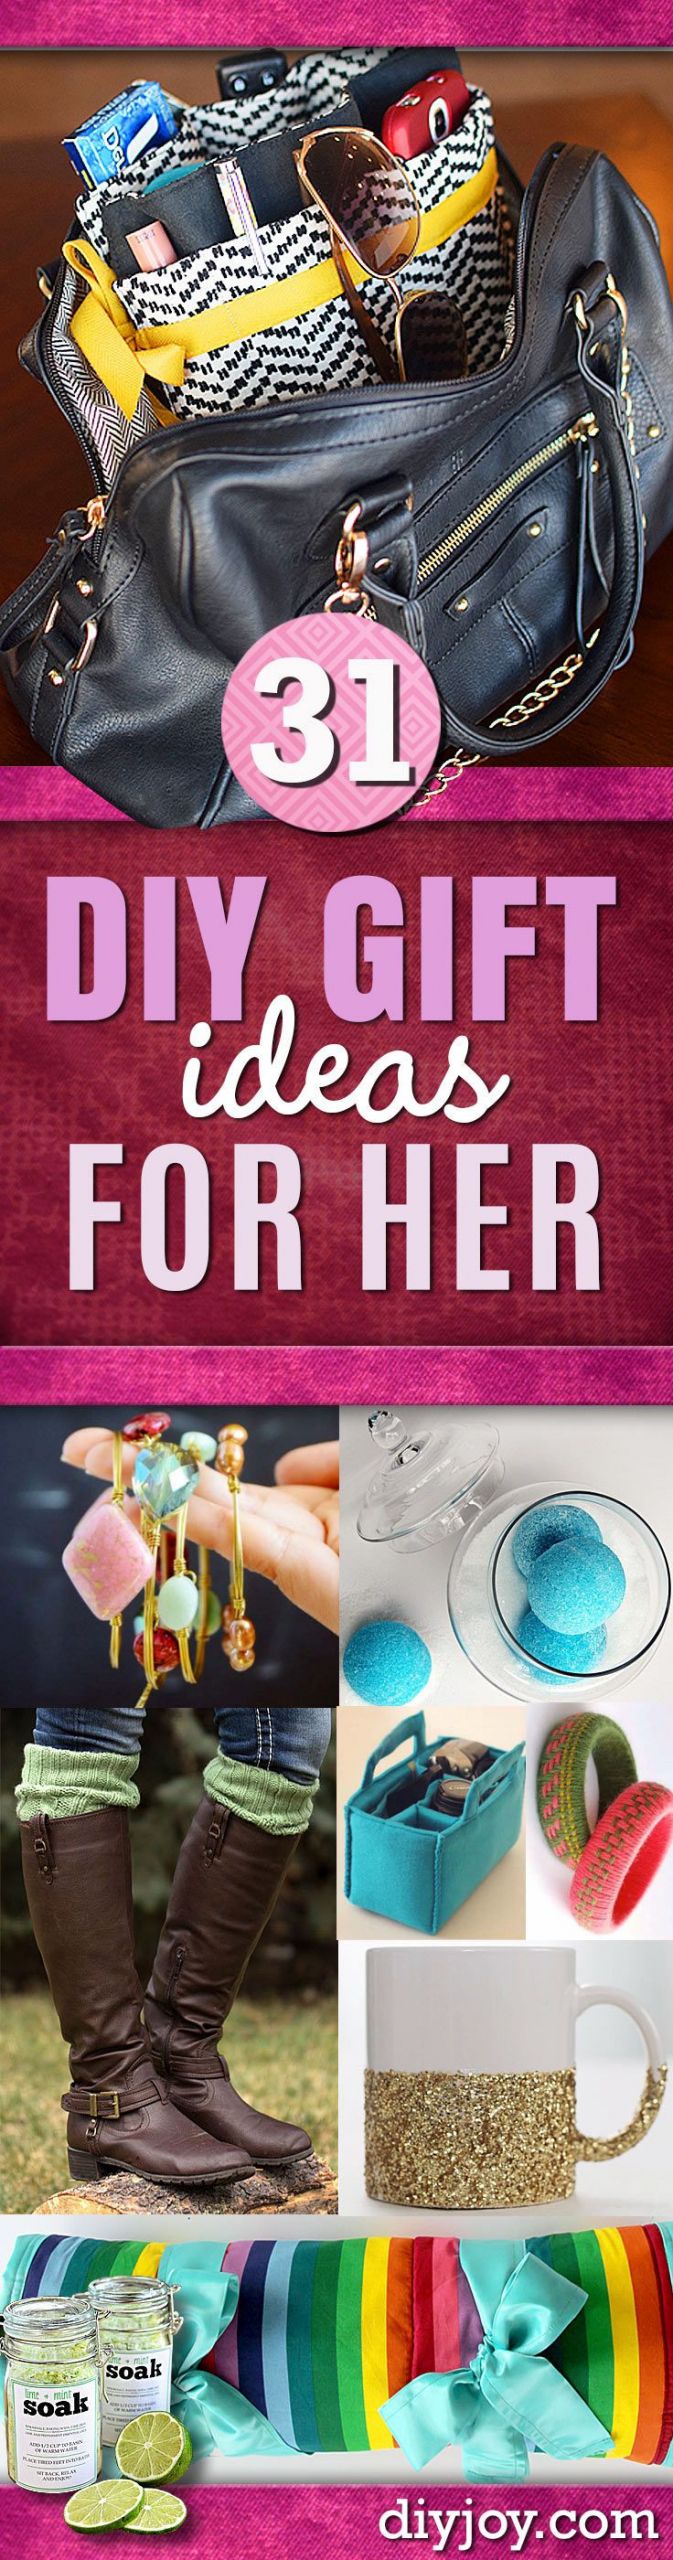 Gift Ideas To Make For Girlfriend
 DIY Gift Ideas for Her